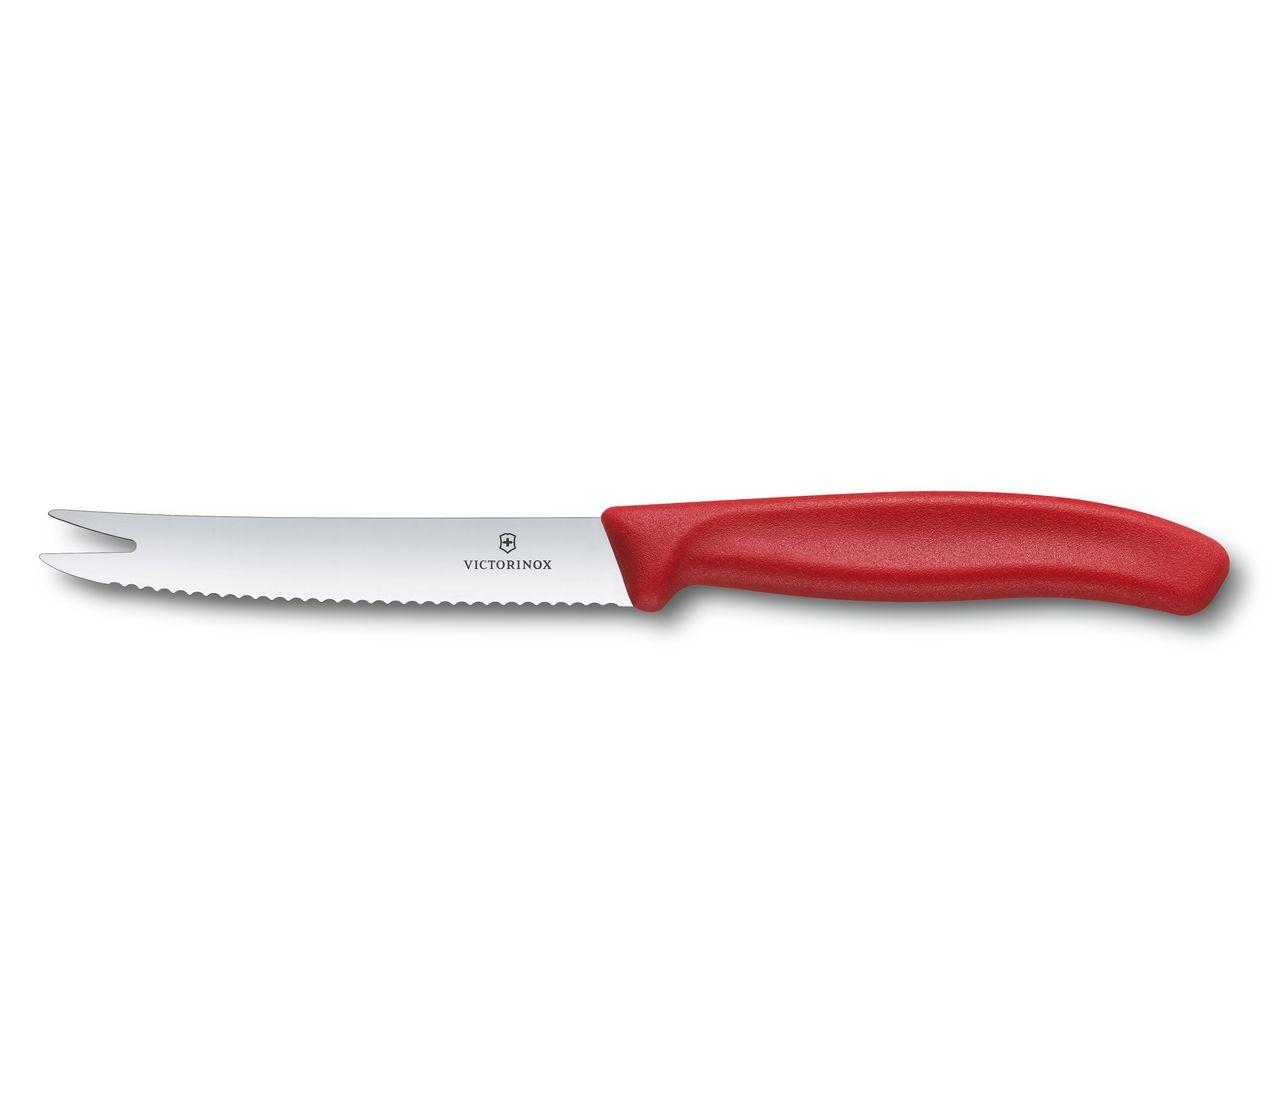 Victorinox Swiss Classic Cheese and Sausage Knife in red